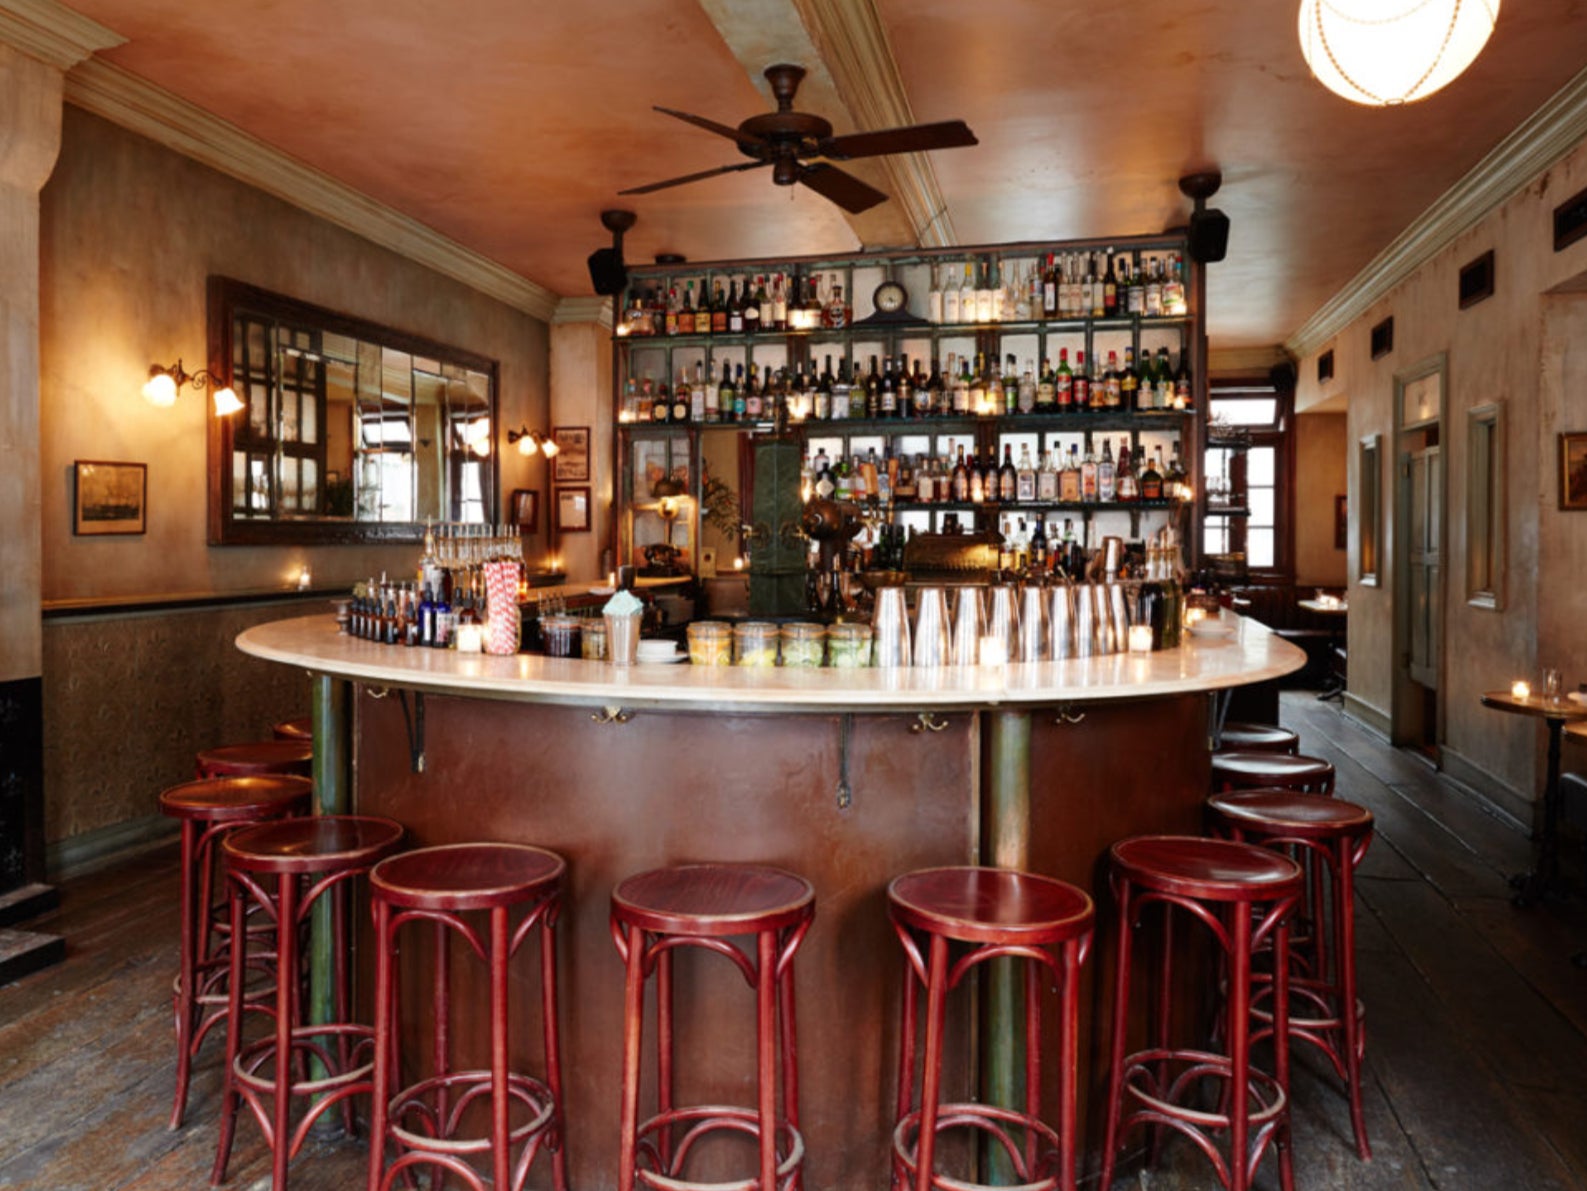 Maison Premiere, the oyster and wine bar in Brooklyn’s salubrious Williamsburg